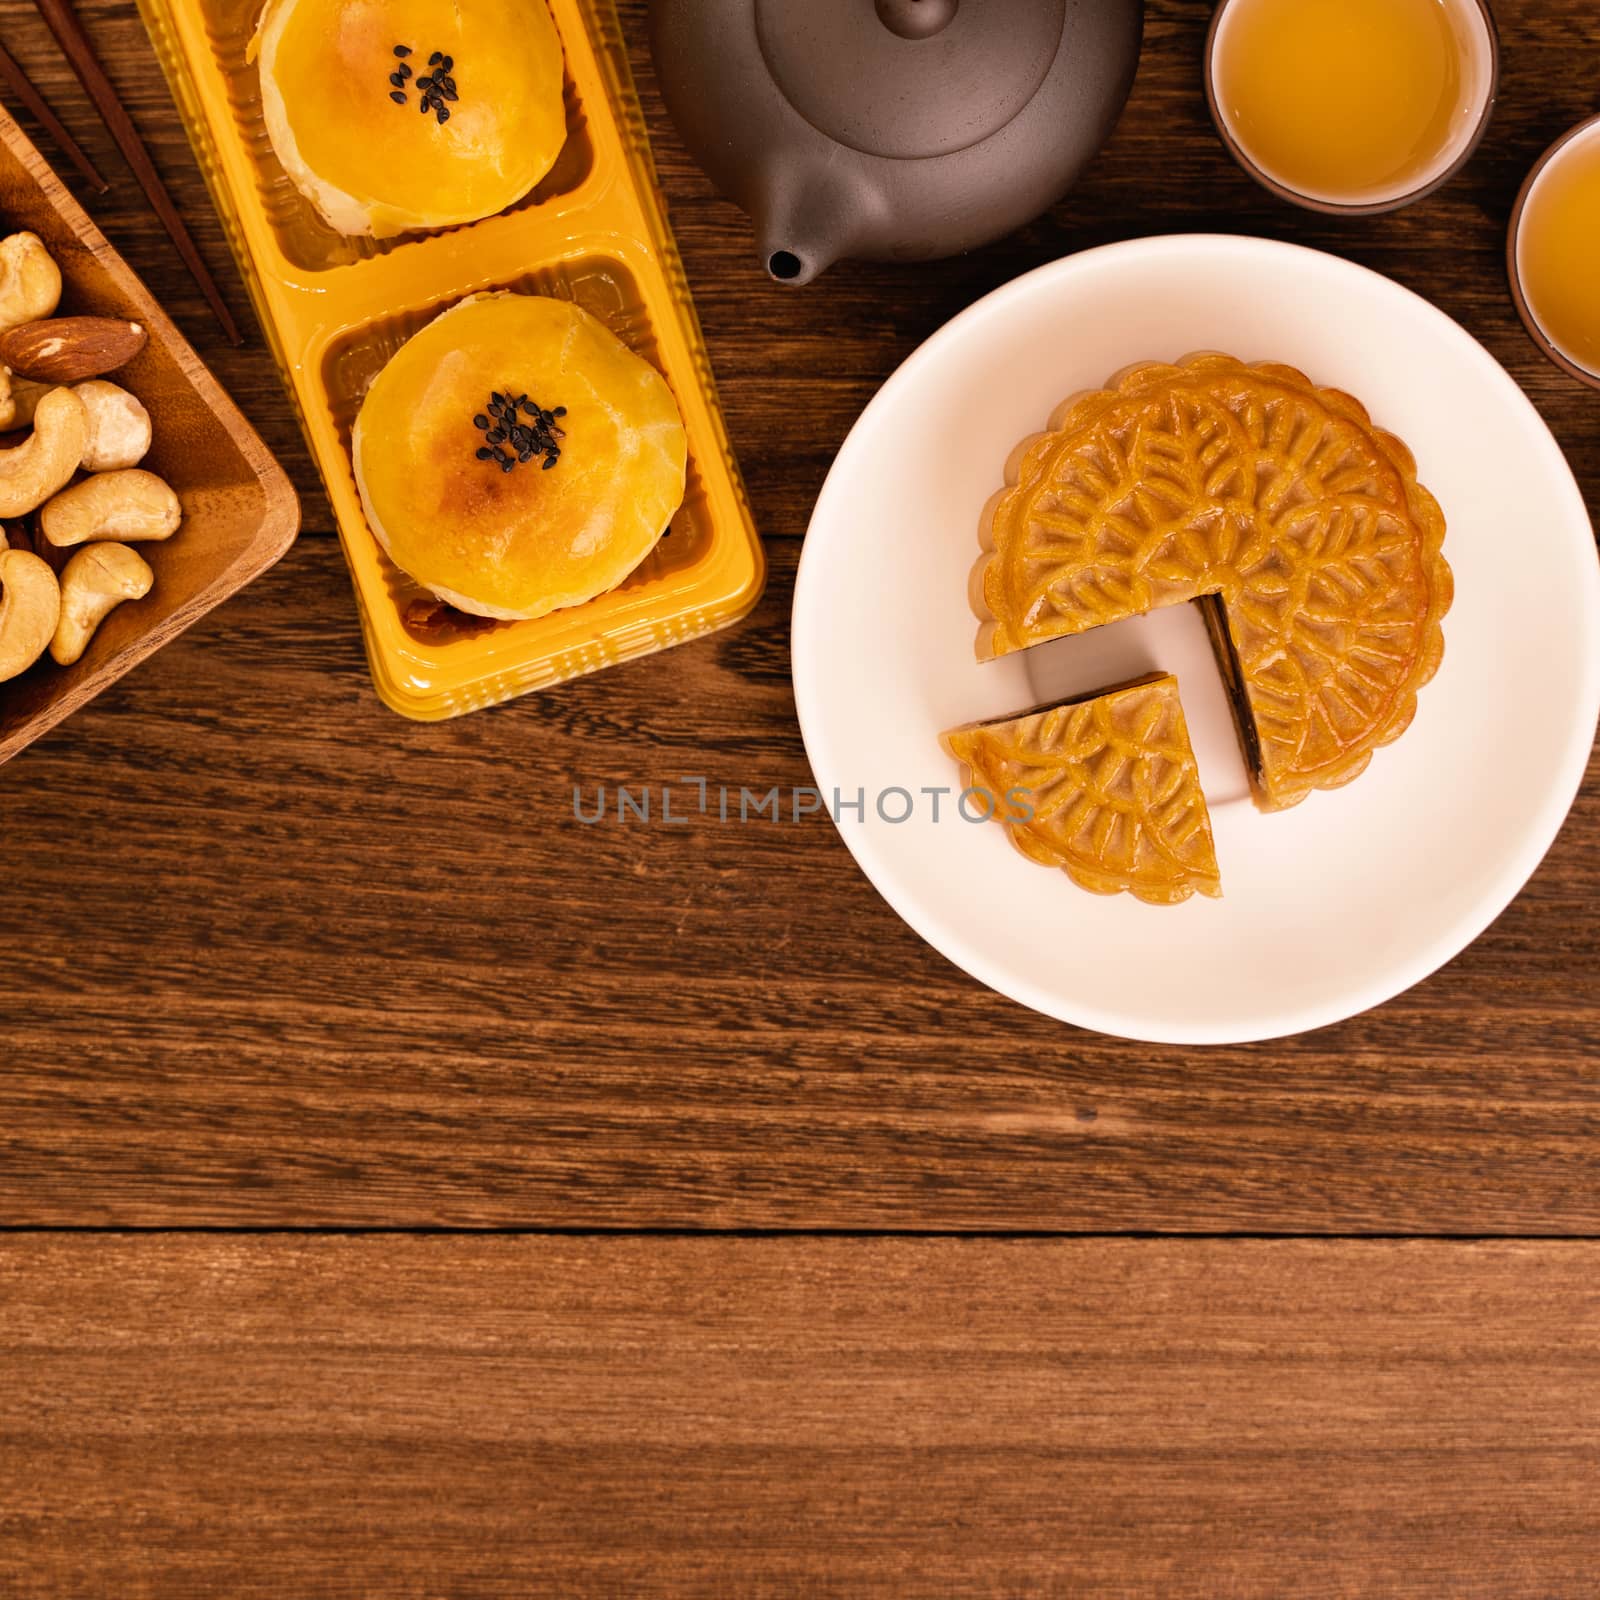 Moon cake for Mid-Autumn Festival, delicious beautiful fresh moo by ROMIXIMAGE